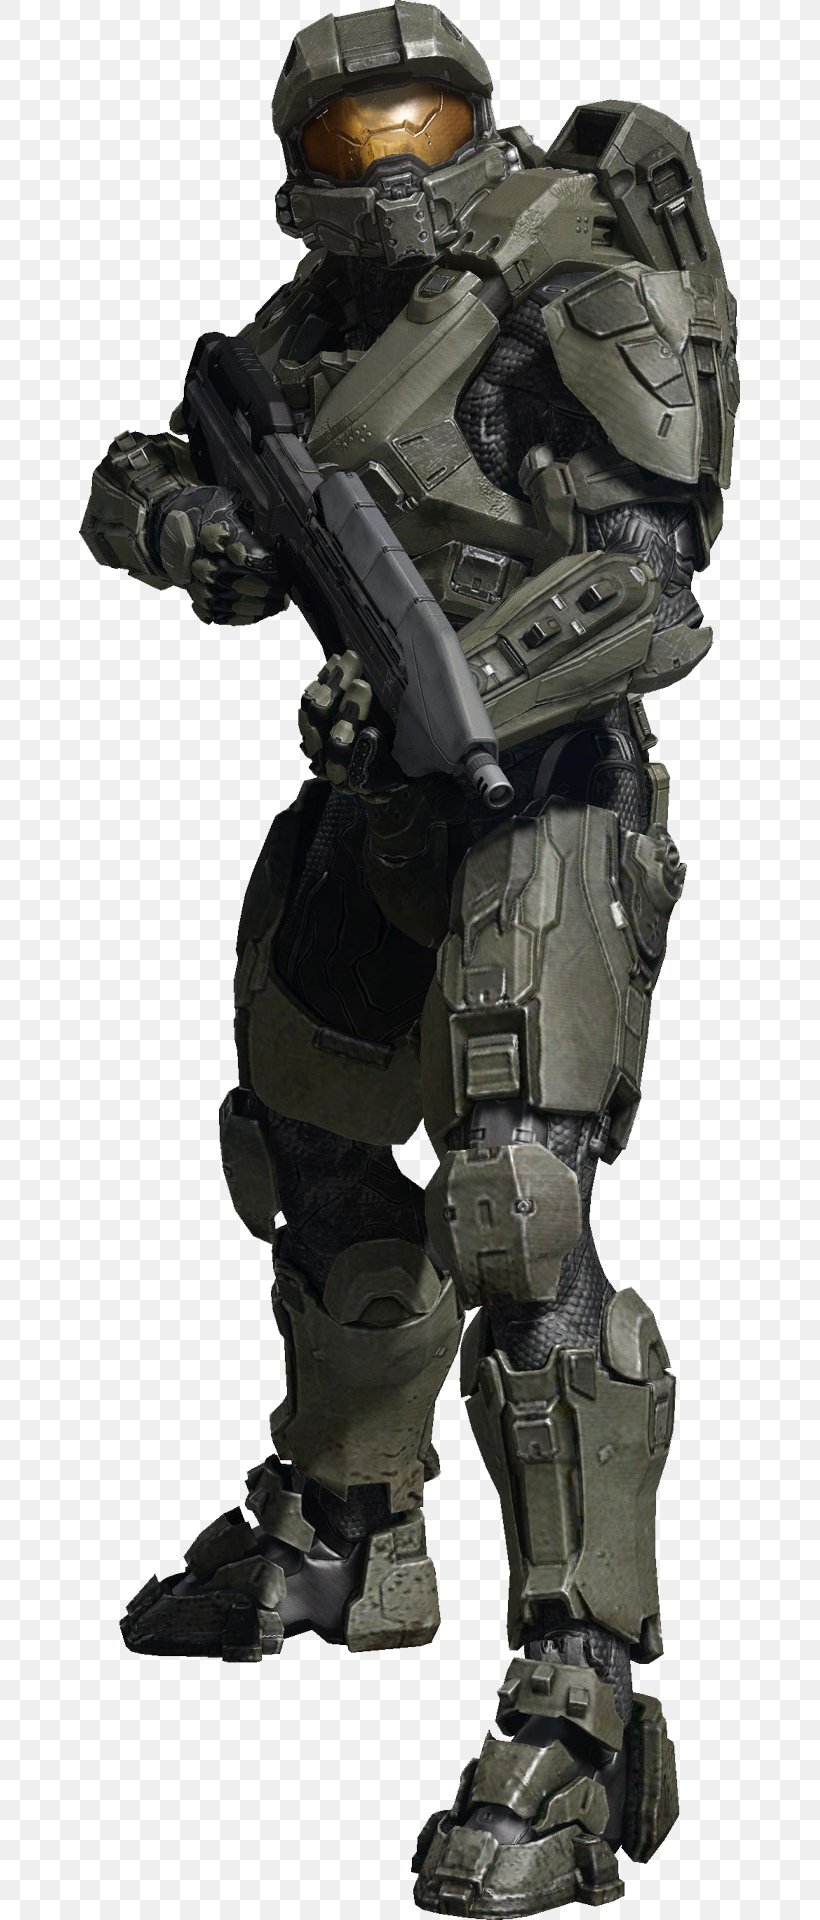 Halo 4 Halo 3 Halo 5: Guardians Master Chief Video Game, PNG, 661x1920px, 343 Industries, Halo 4, Army, Character, Covenant Download Free